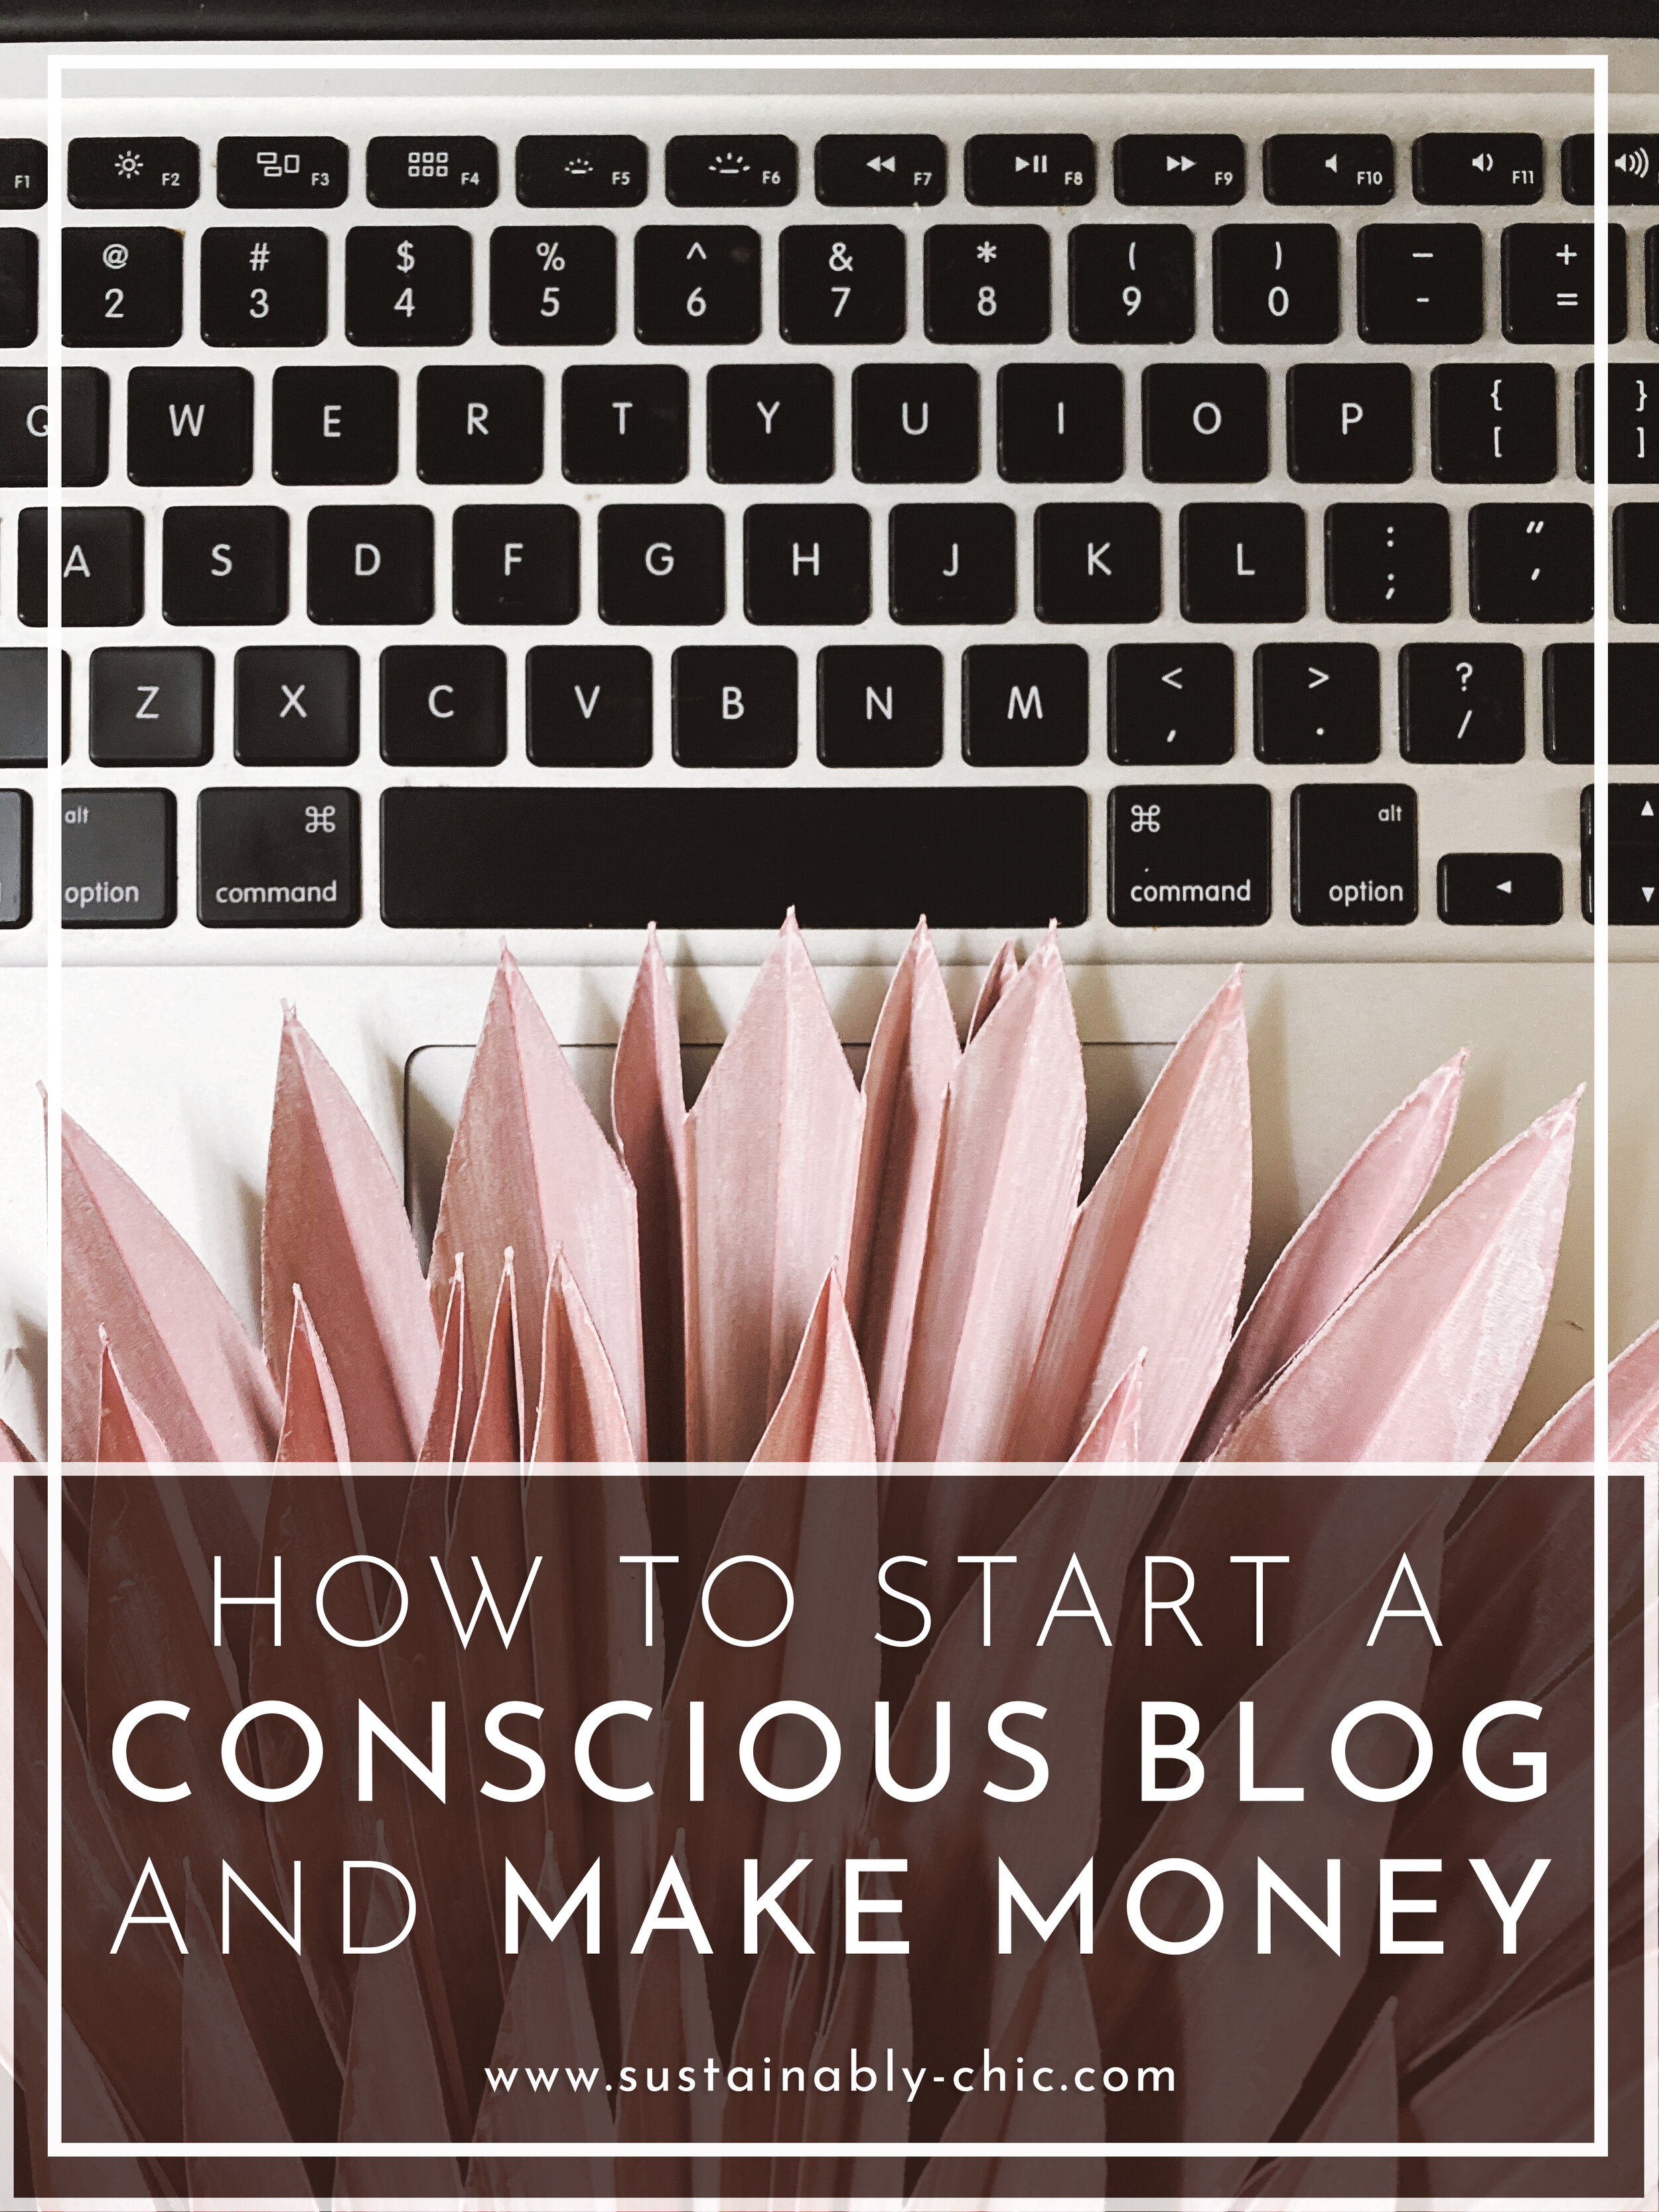 how-to-start-a-blog-and-make-money.jpg